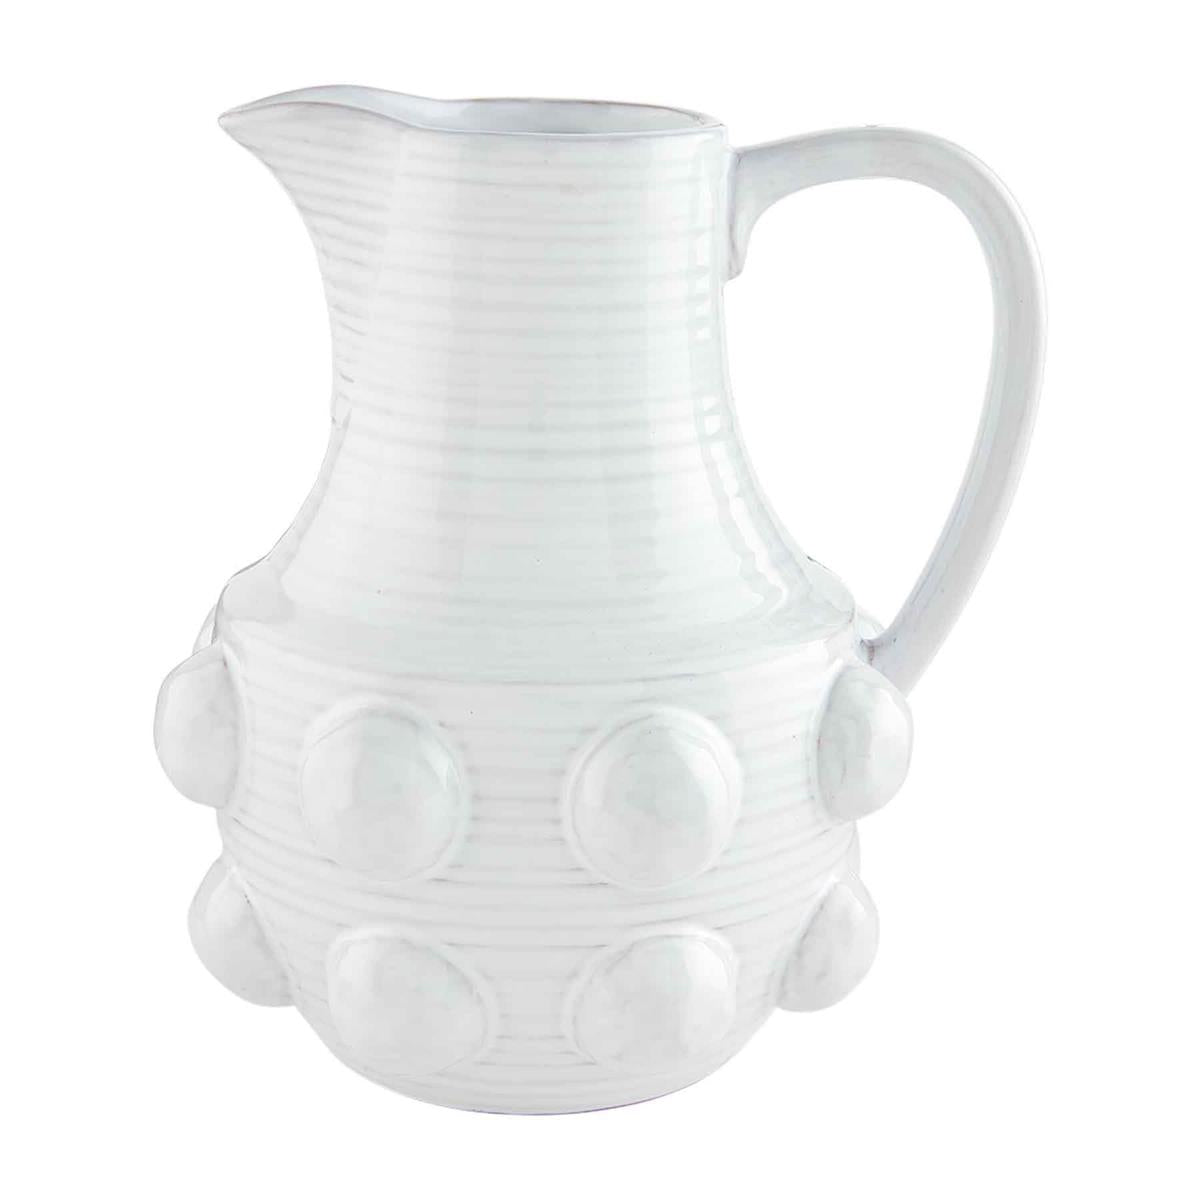 raised dot pitcher on a white background